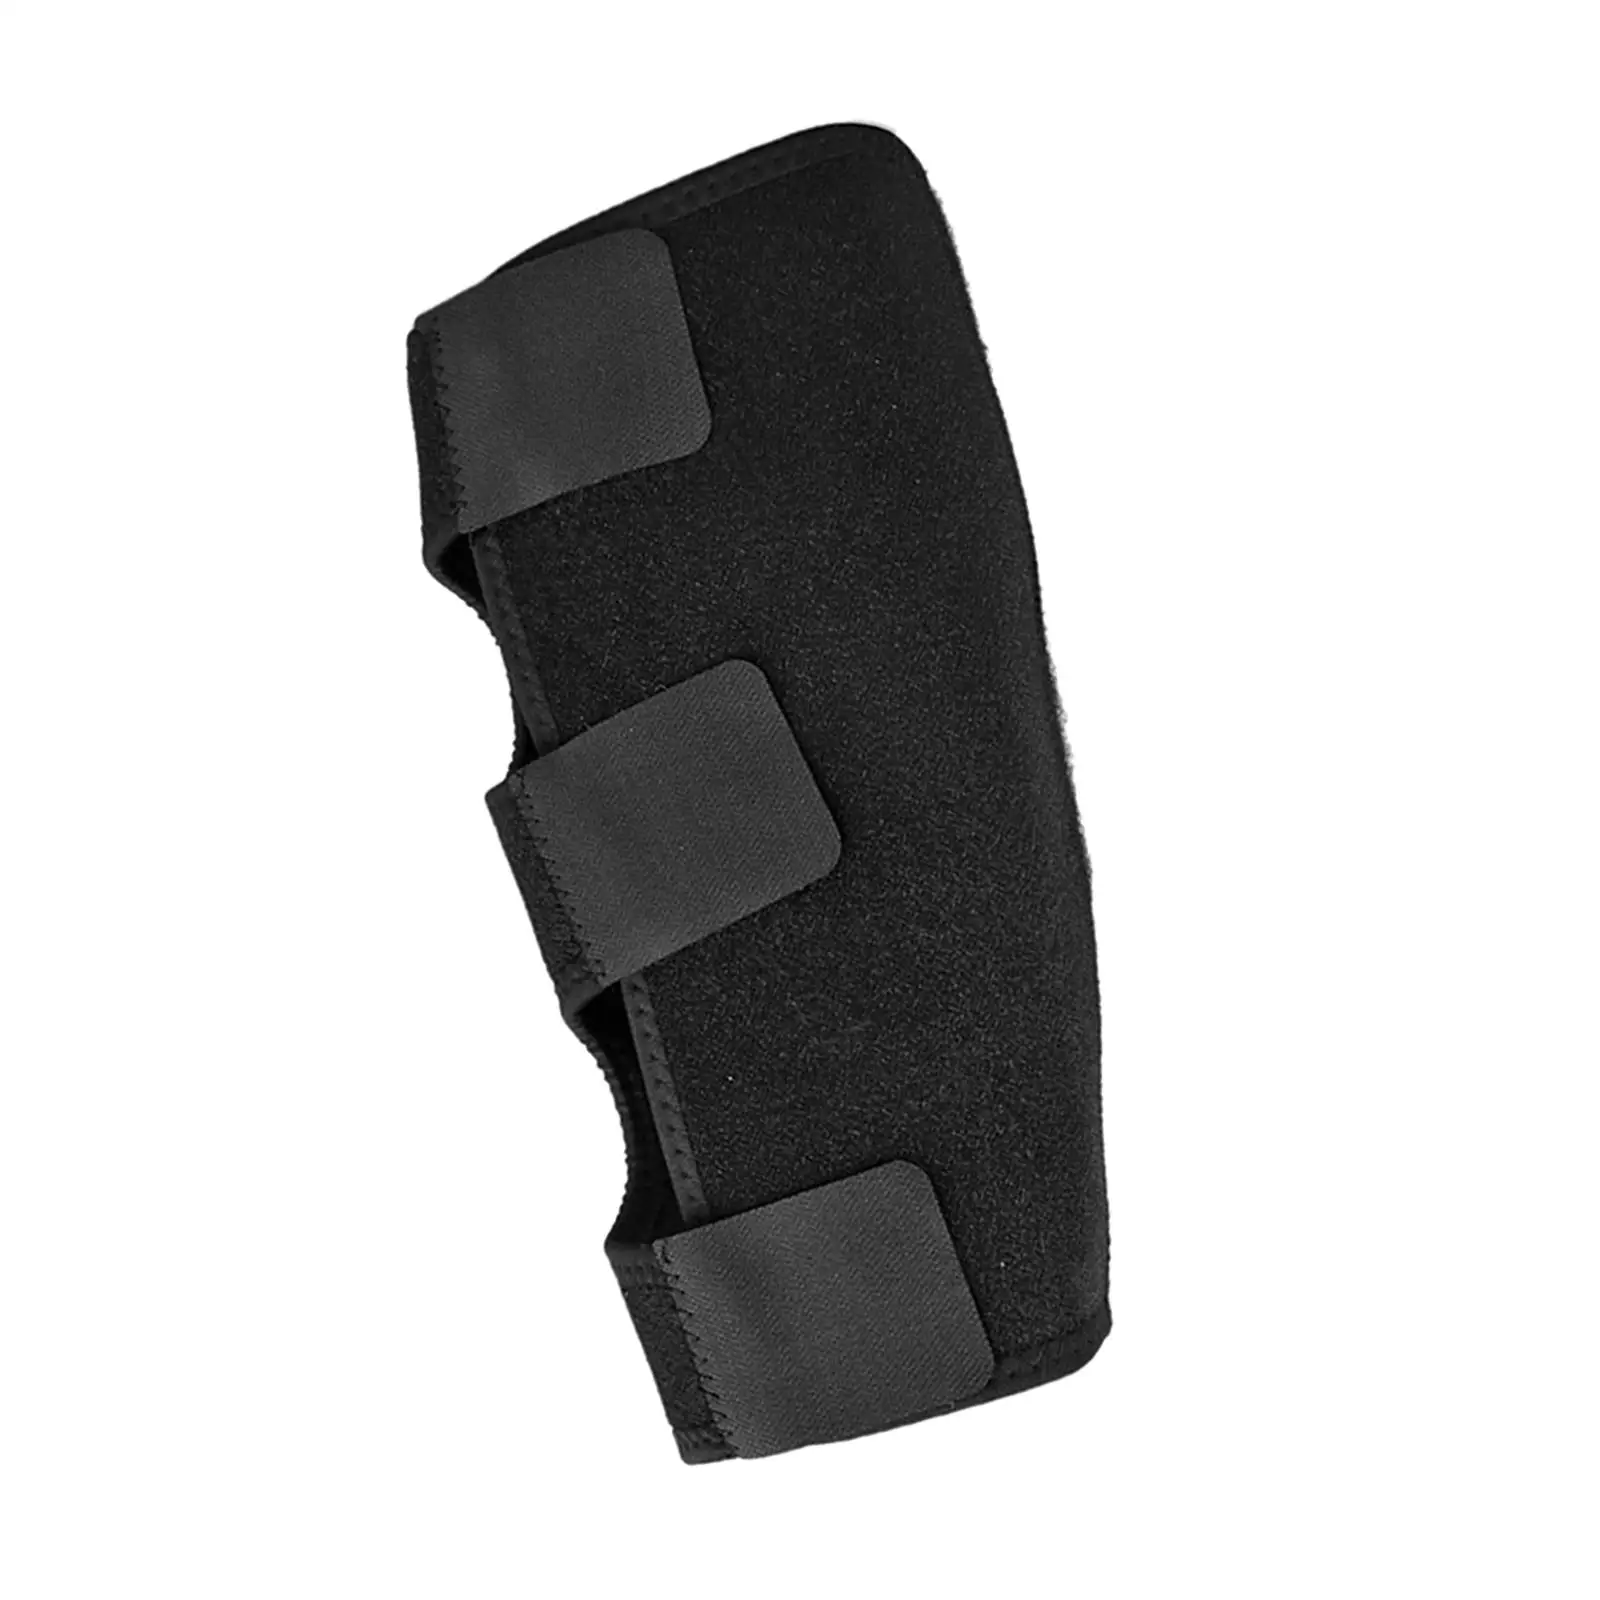 1 Piece Calf Support Brace Accessory Adjustable for outdoor sports Training Running